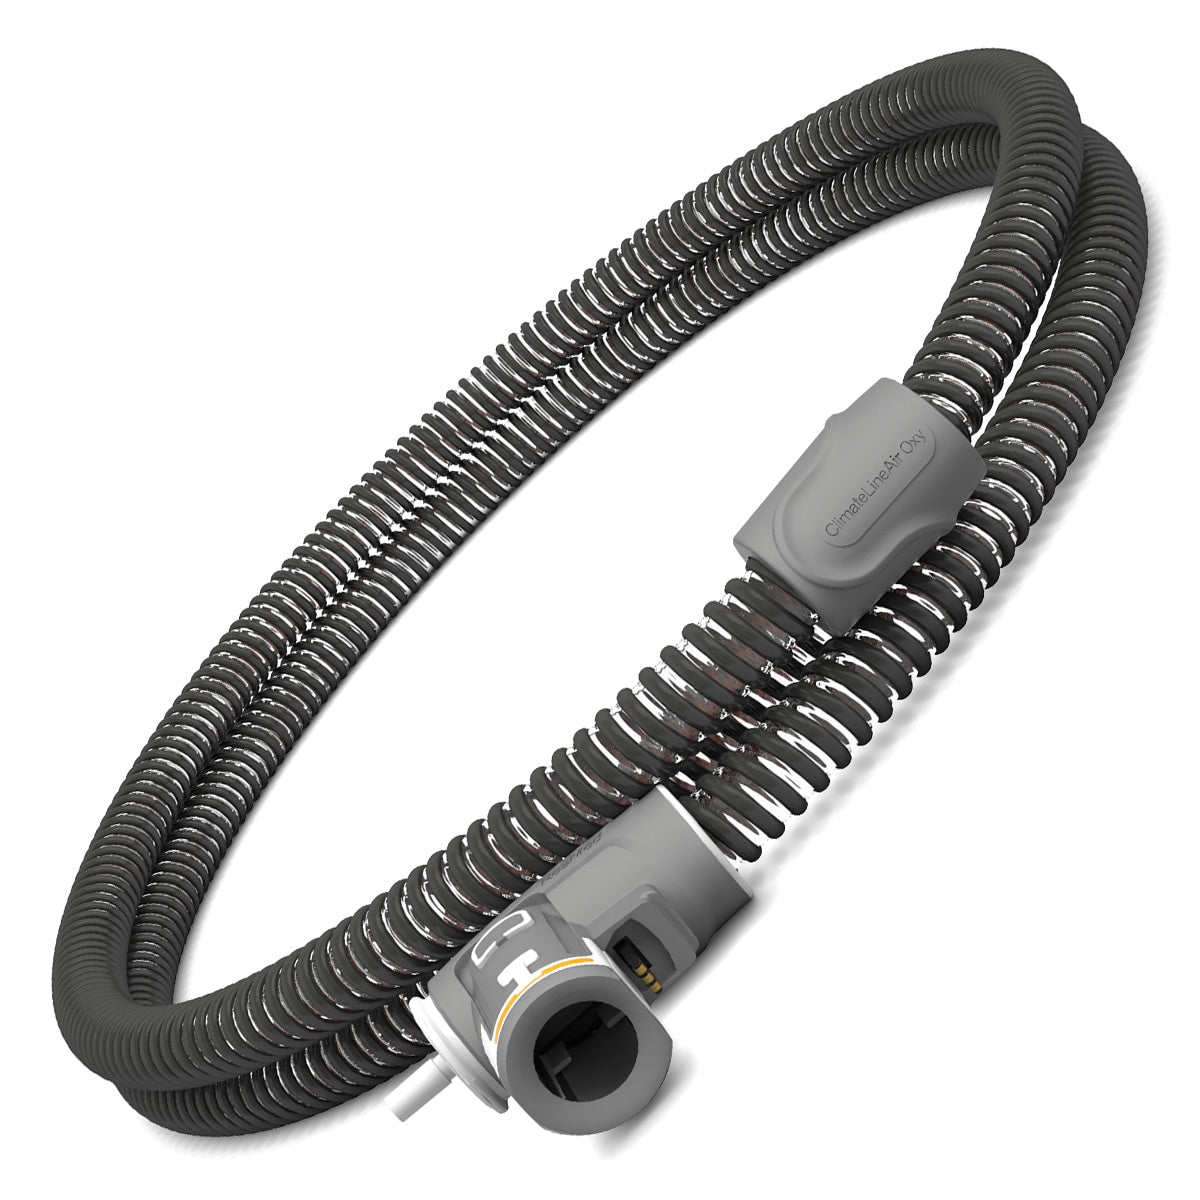 ClimateLineAir OXY Heated Tubing (with Oxygen Adapter) for AirSense 10 & AirCurve 10 Series CPAP/BiLevel Machines